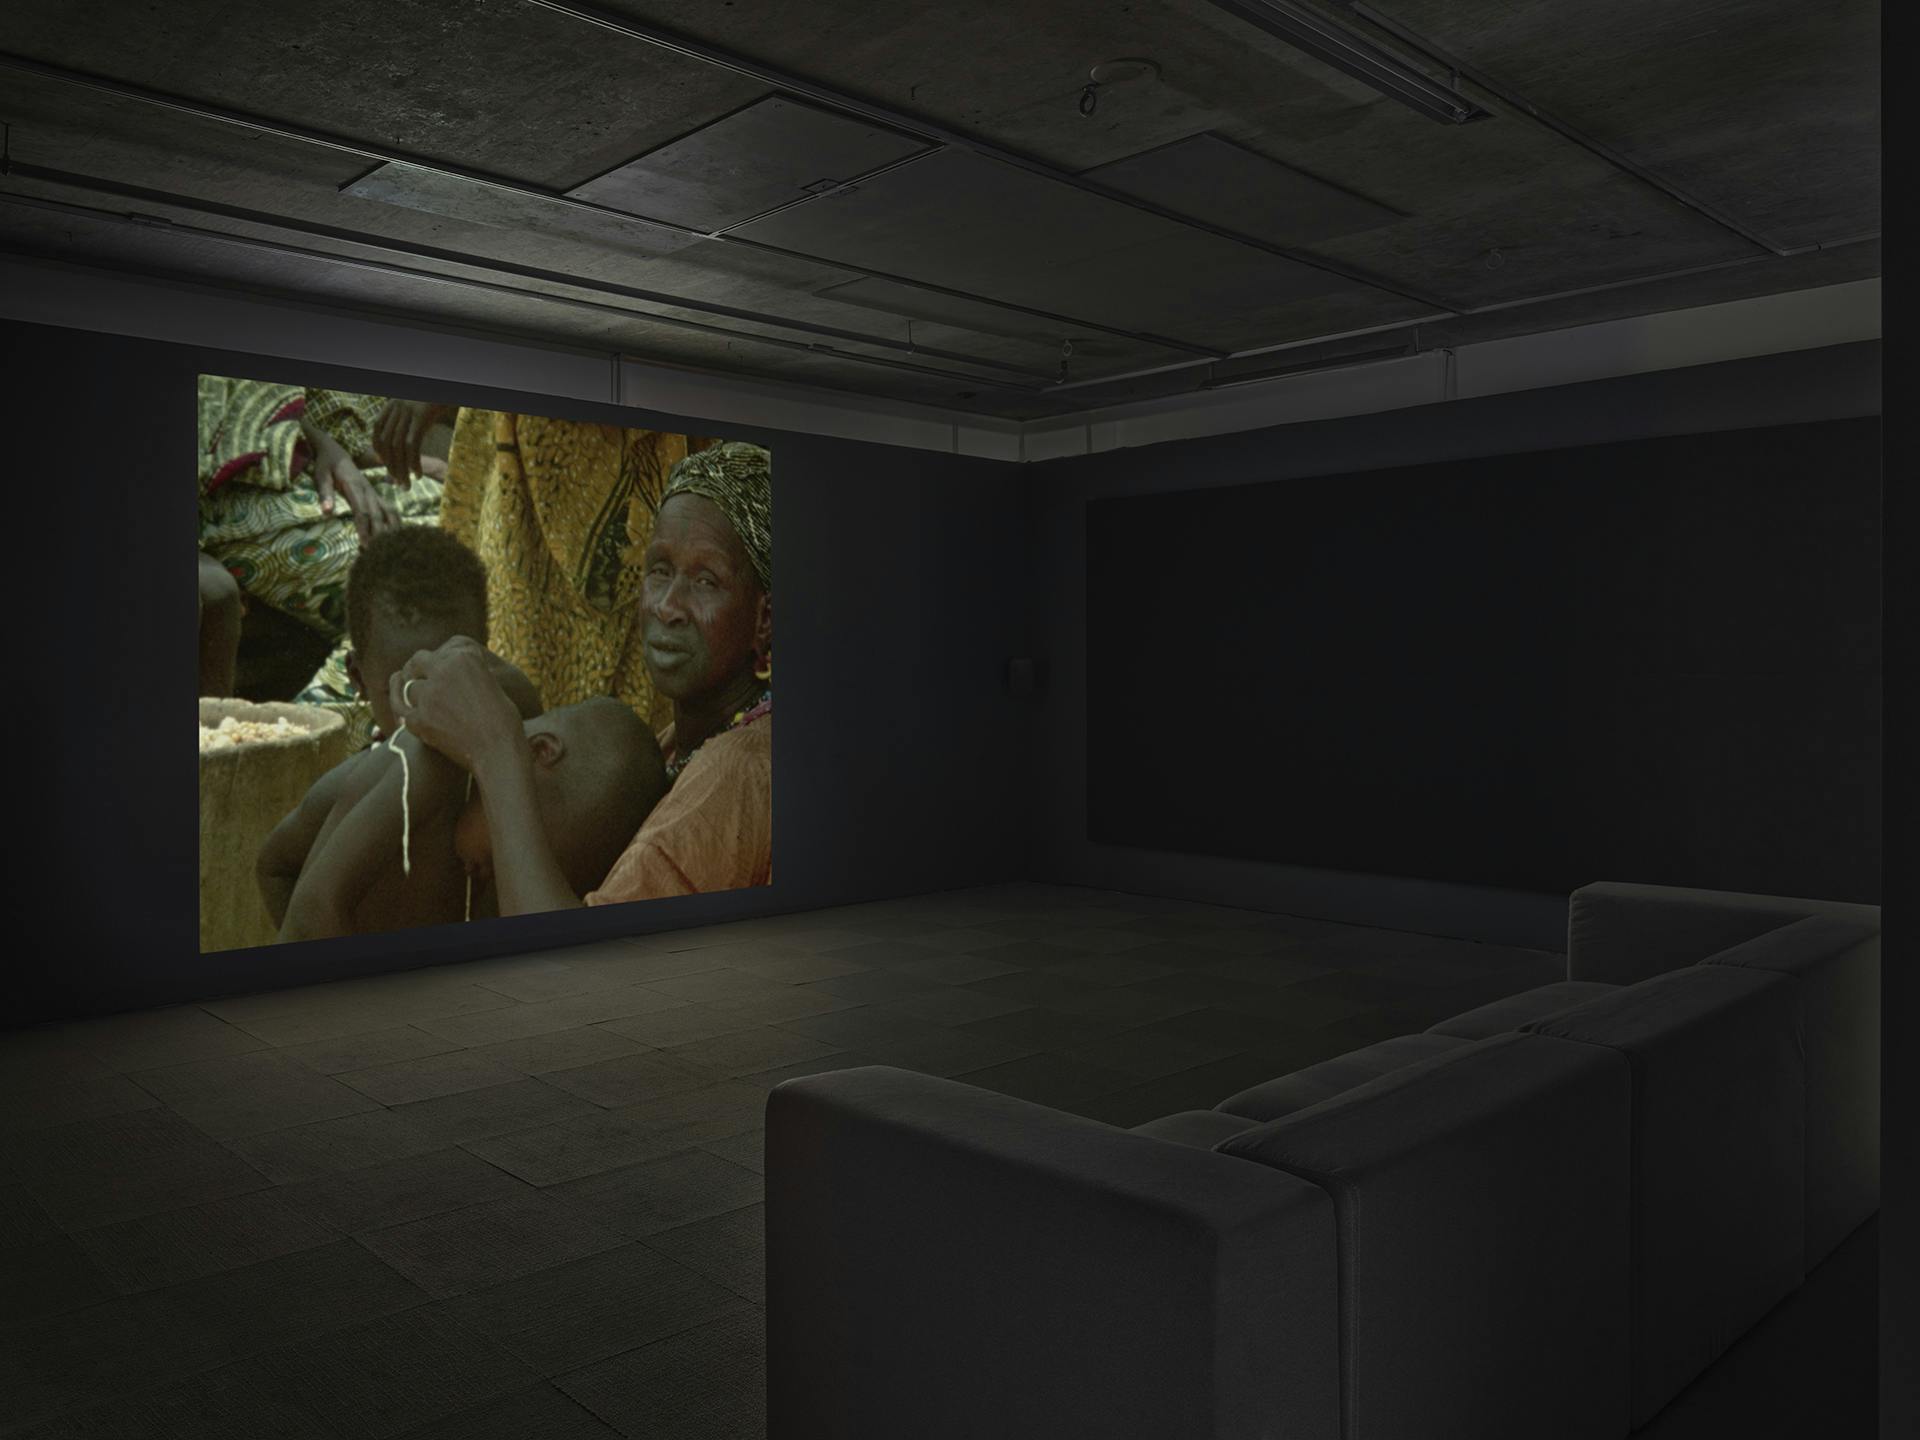 A video on a wall in a dark room depicting a person looking at the camera; a couch is visible in the foreground.